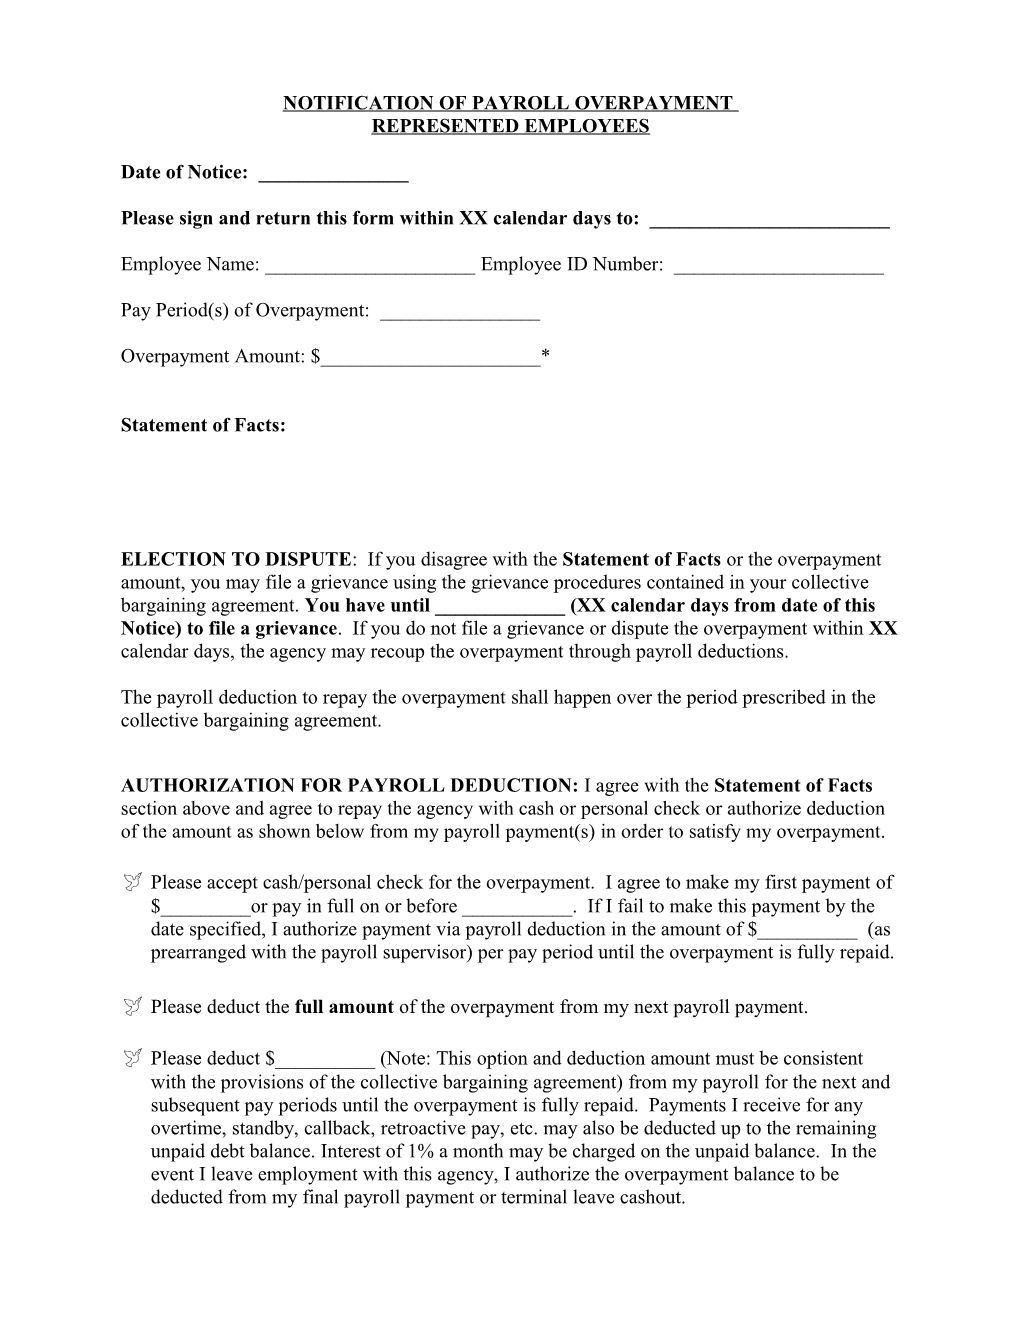 Sample Letter - Notification of Payroll Overpayment - Represented Employees